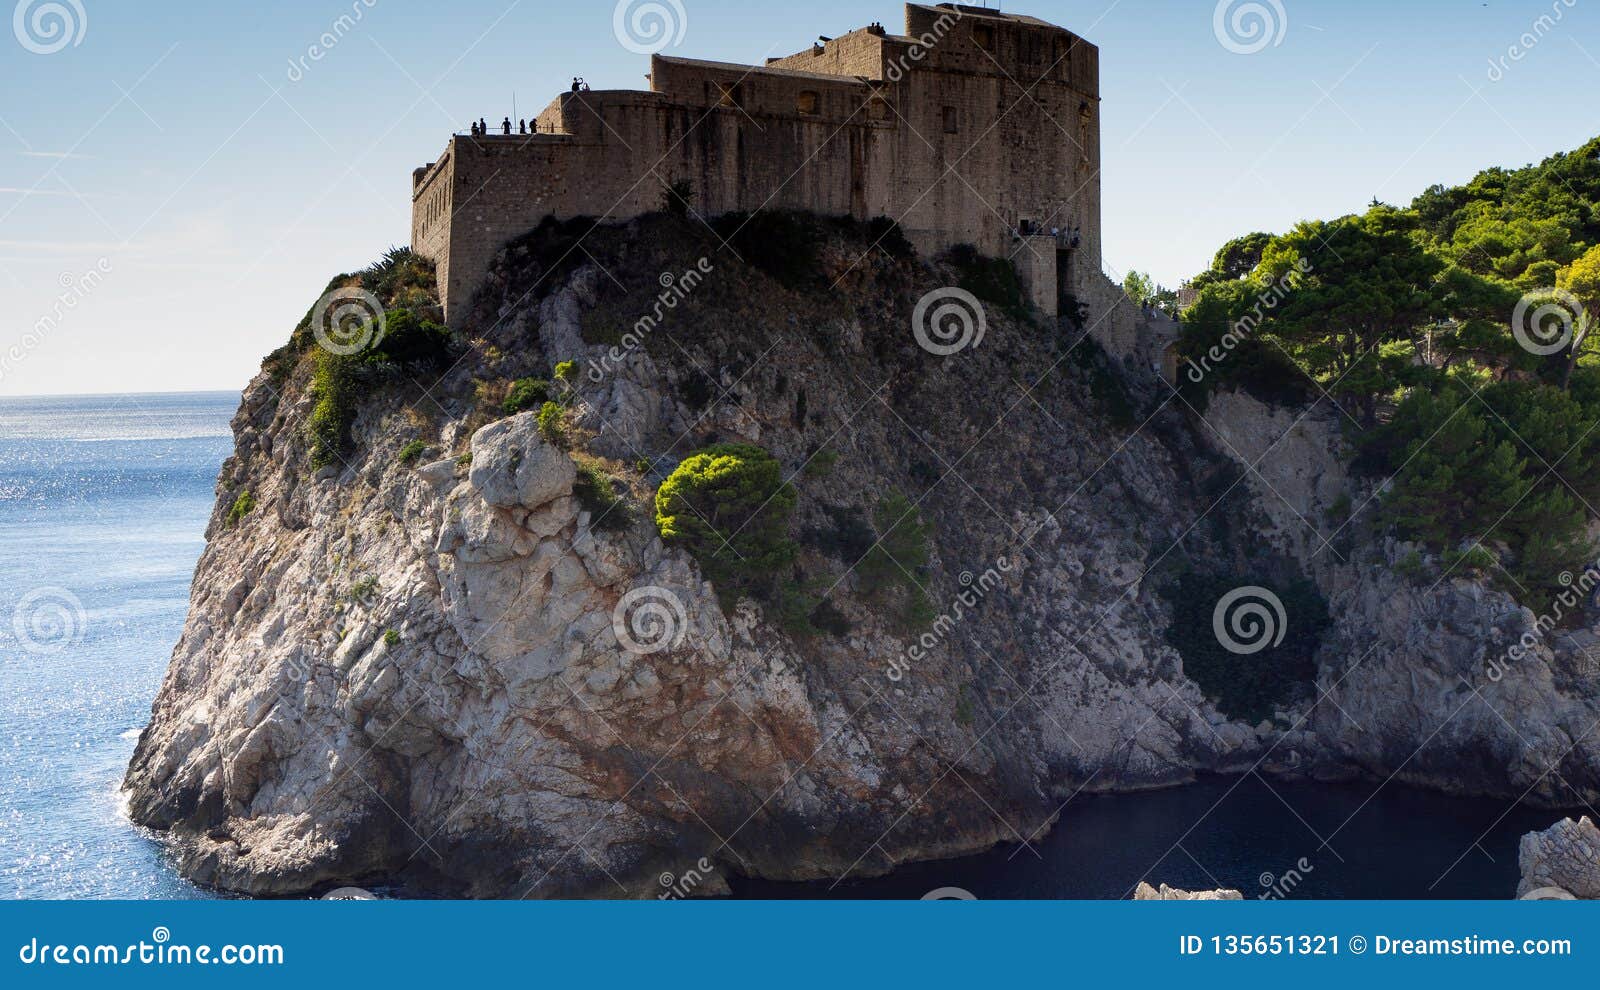 fortress lovrijenac is a game of thrones shooting set in dubrovnik